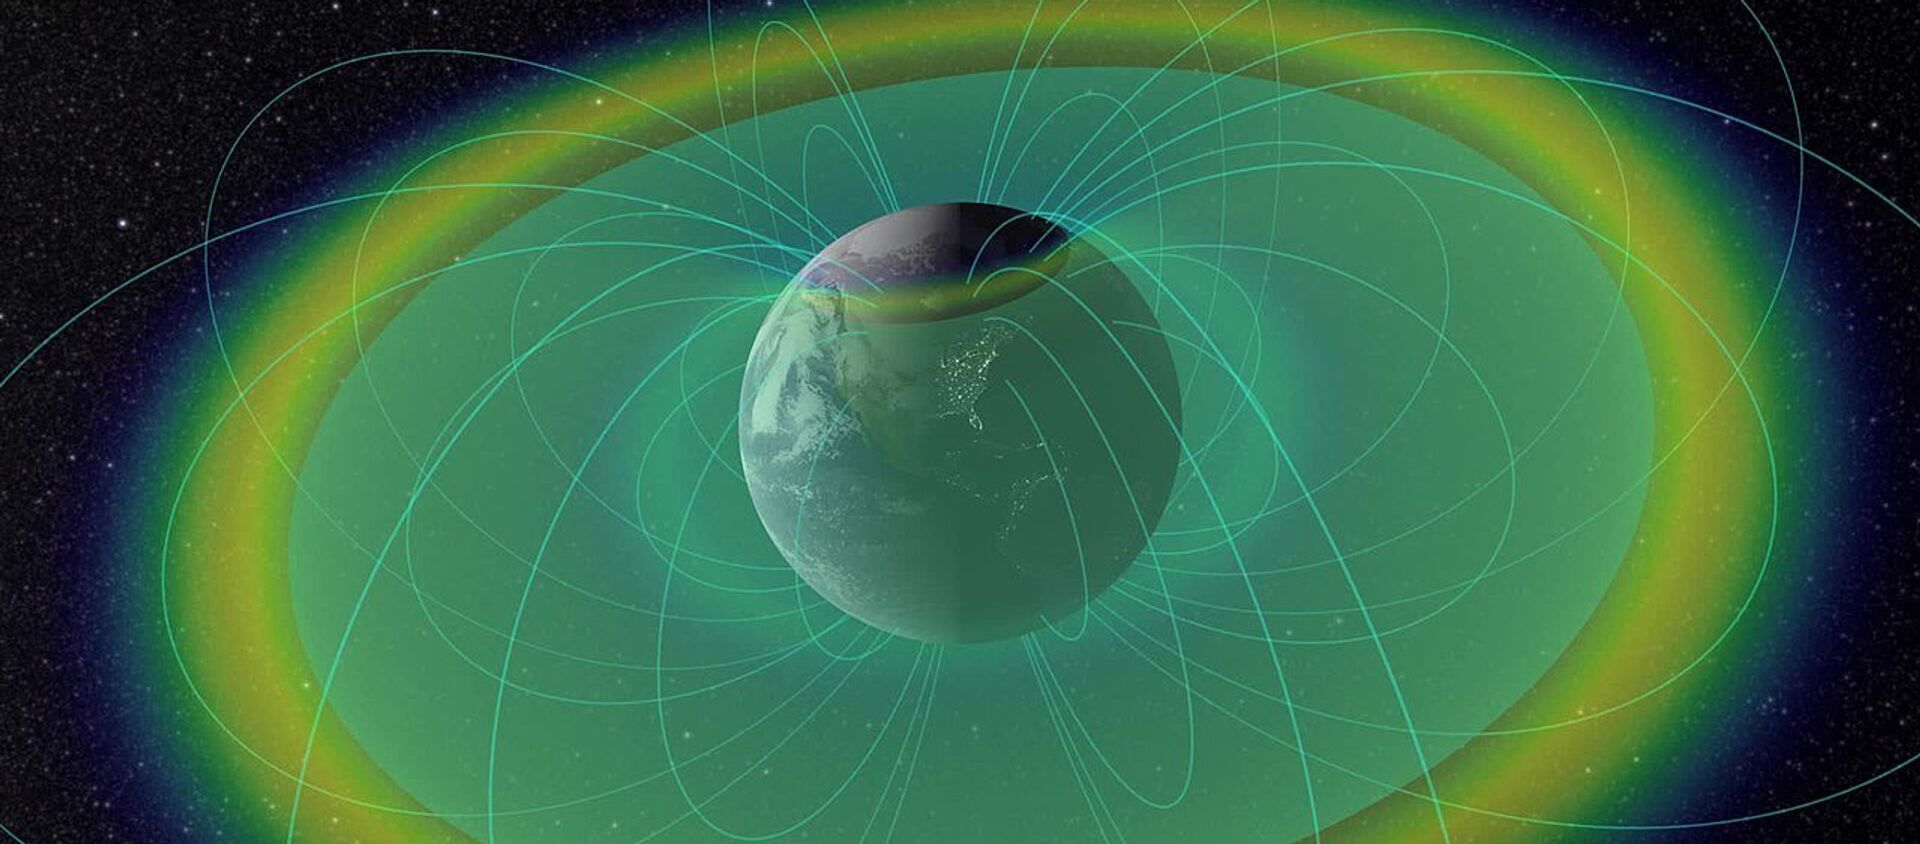 Two donuts of seething radiation that surround Earth, called the Van Allen radiation belts, have been found to contain a nearly impenetrable barrier that prevents the fastest, most energetic electrons from reaching Earth - Sputnik International, 1920, 27.12.2019